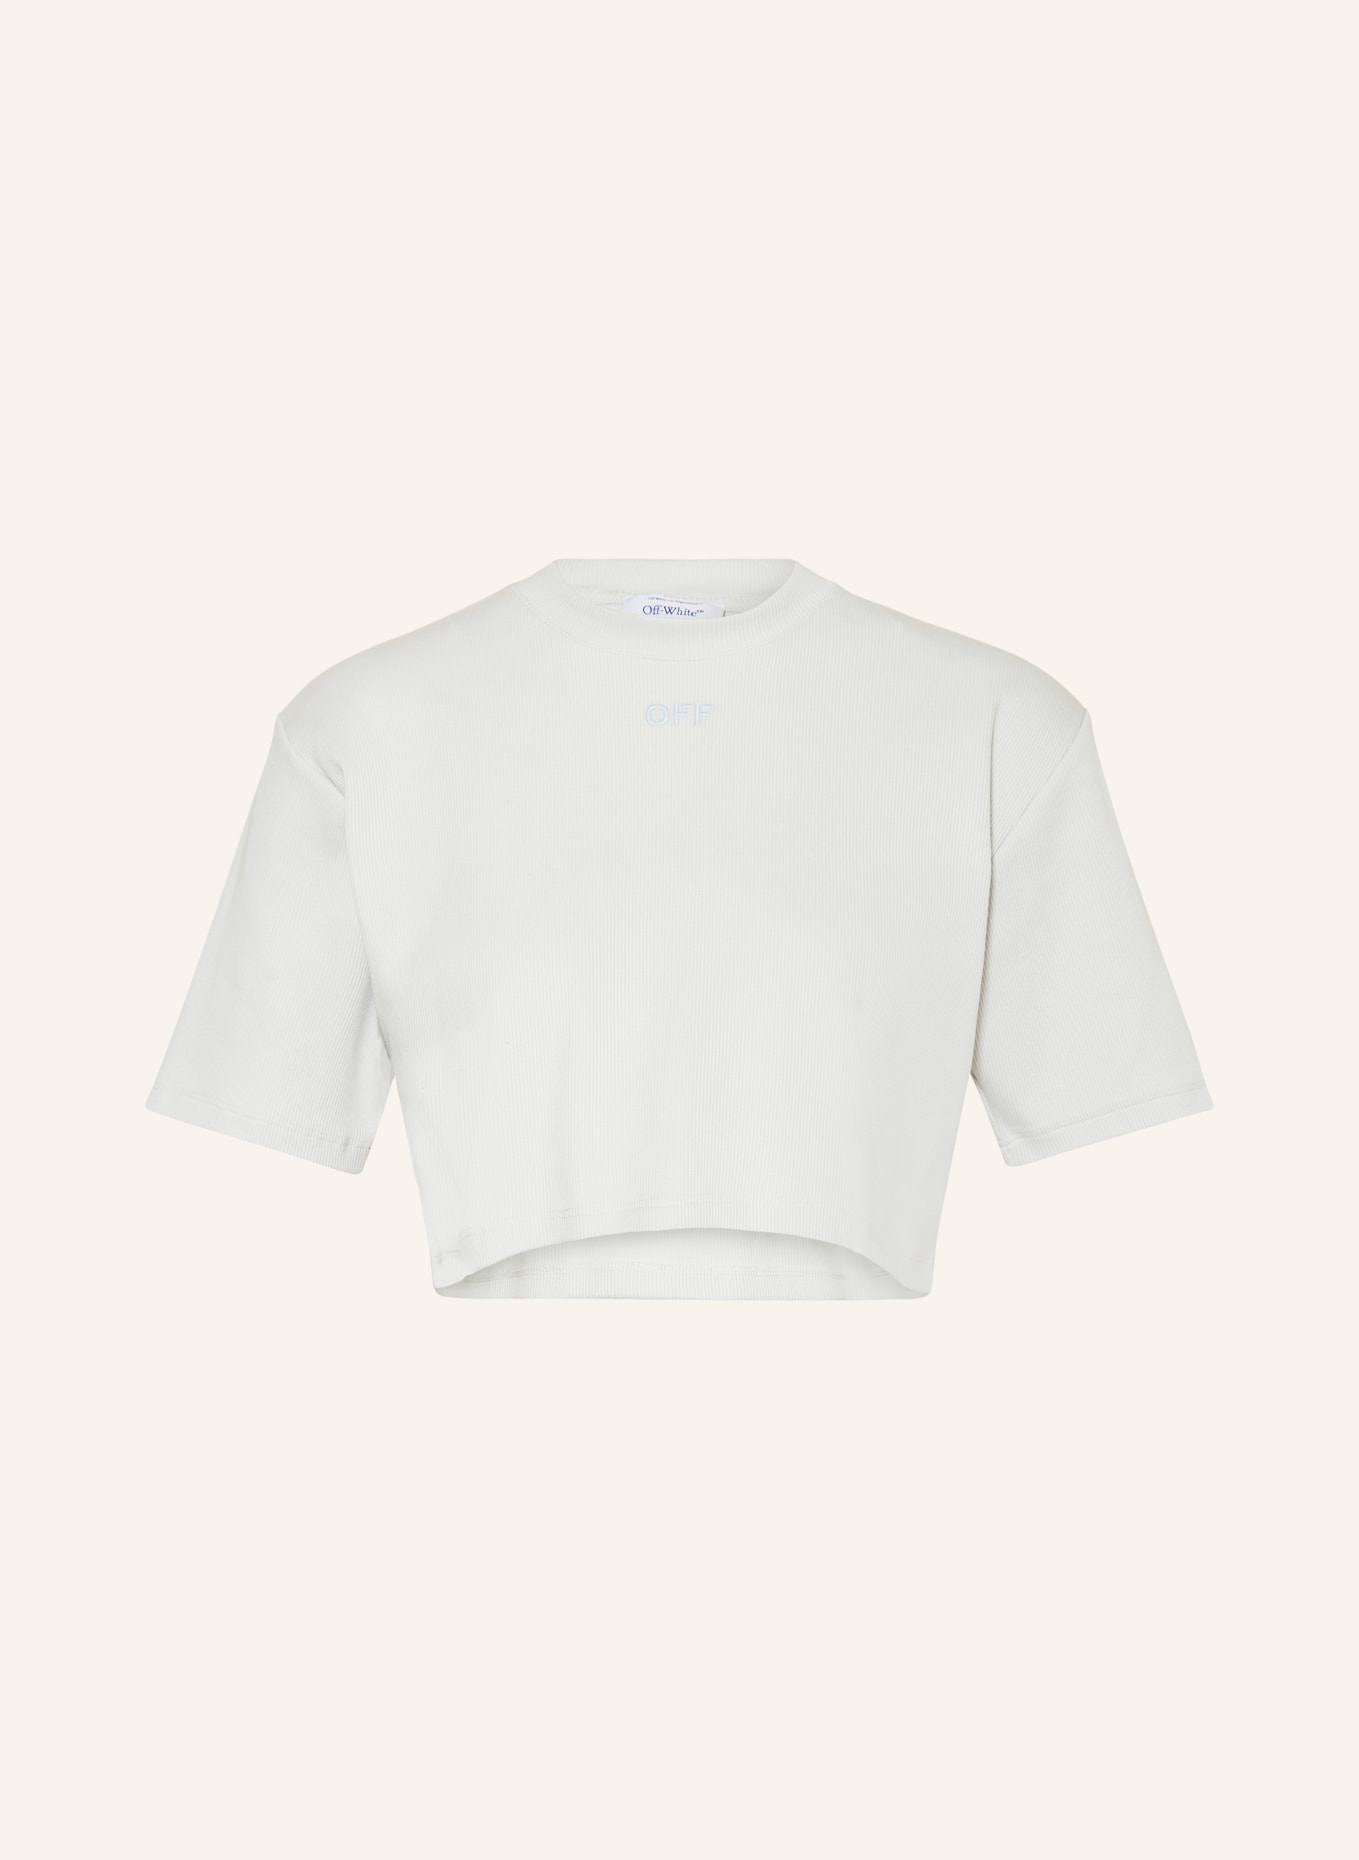 Off-White Cropped shirt, Color: LIGHT BLUE (Image 1)